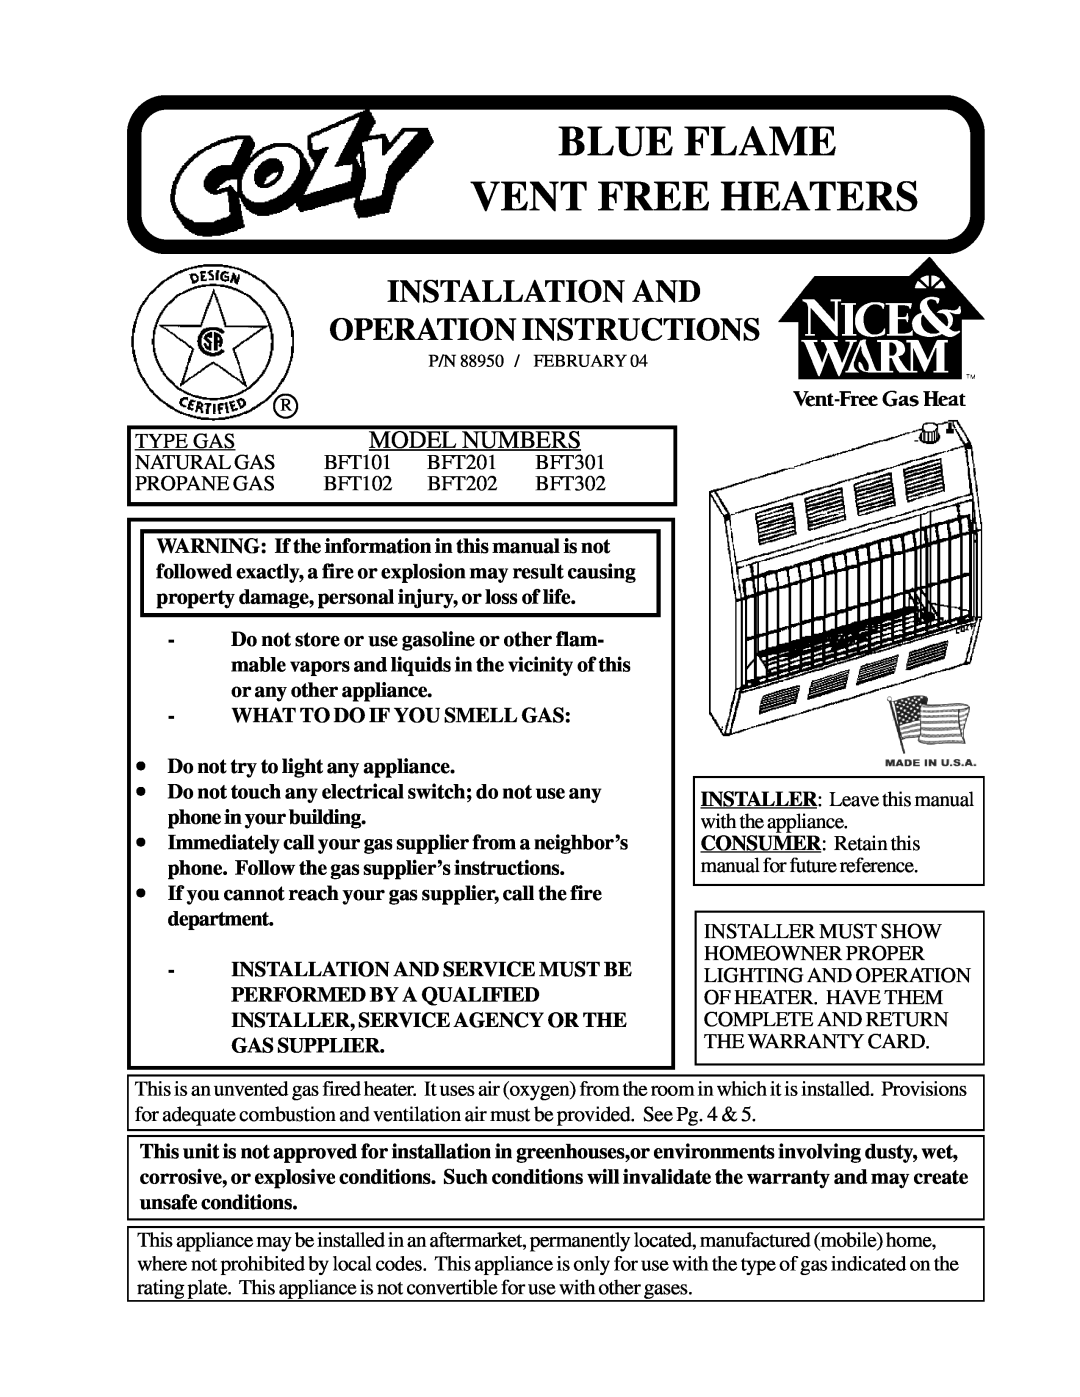 Louisville Tin and Stove BFT301, BFT201, BFT102, BFT202 warranty Installation And Operation Instructions, Model Numbers 